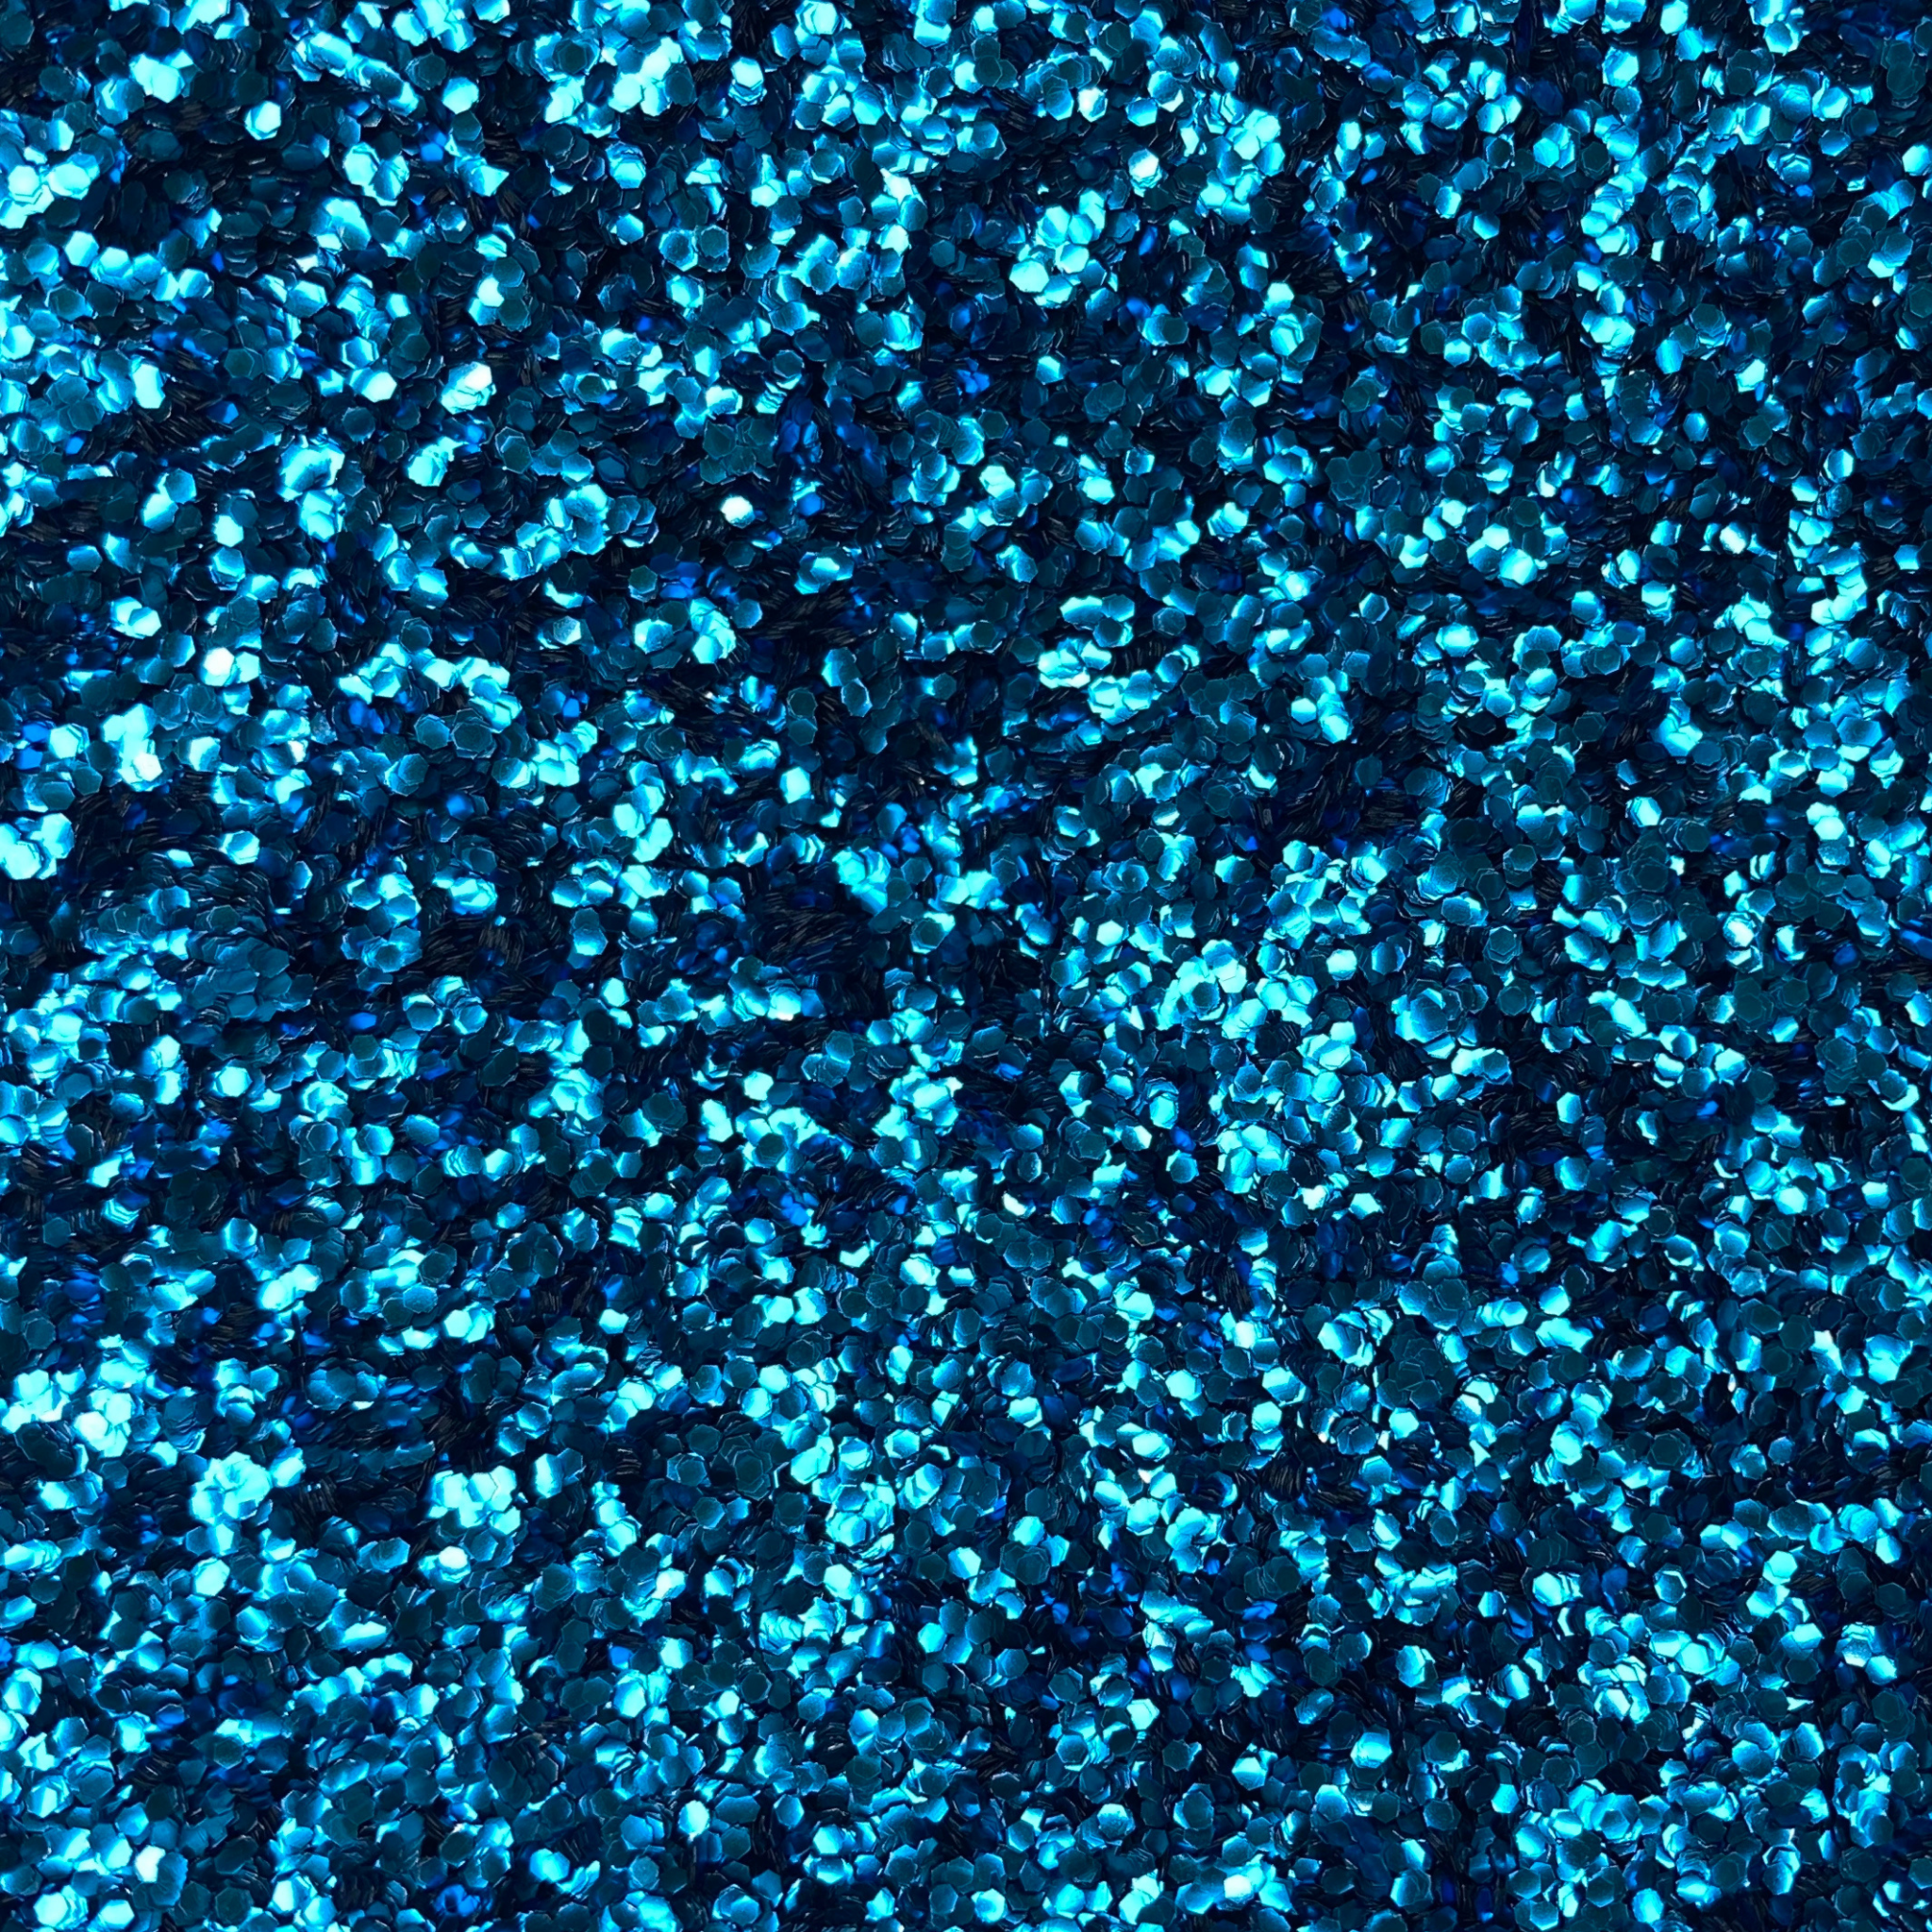 Wholesale chunky blue biodegradable glitter for makeup, festivals and wax melt making